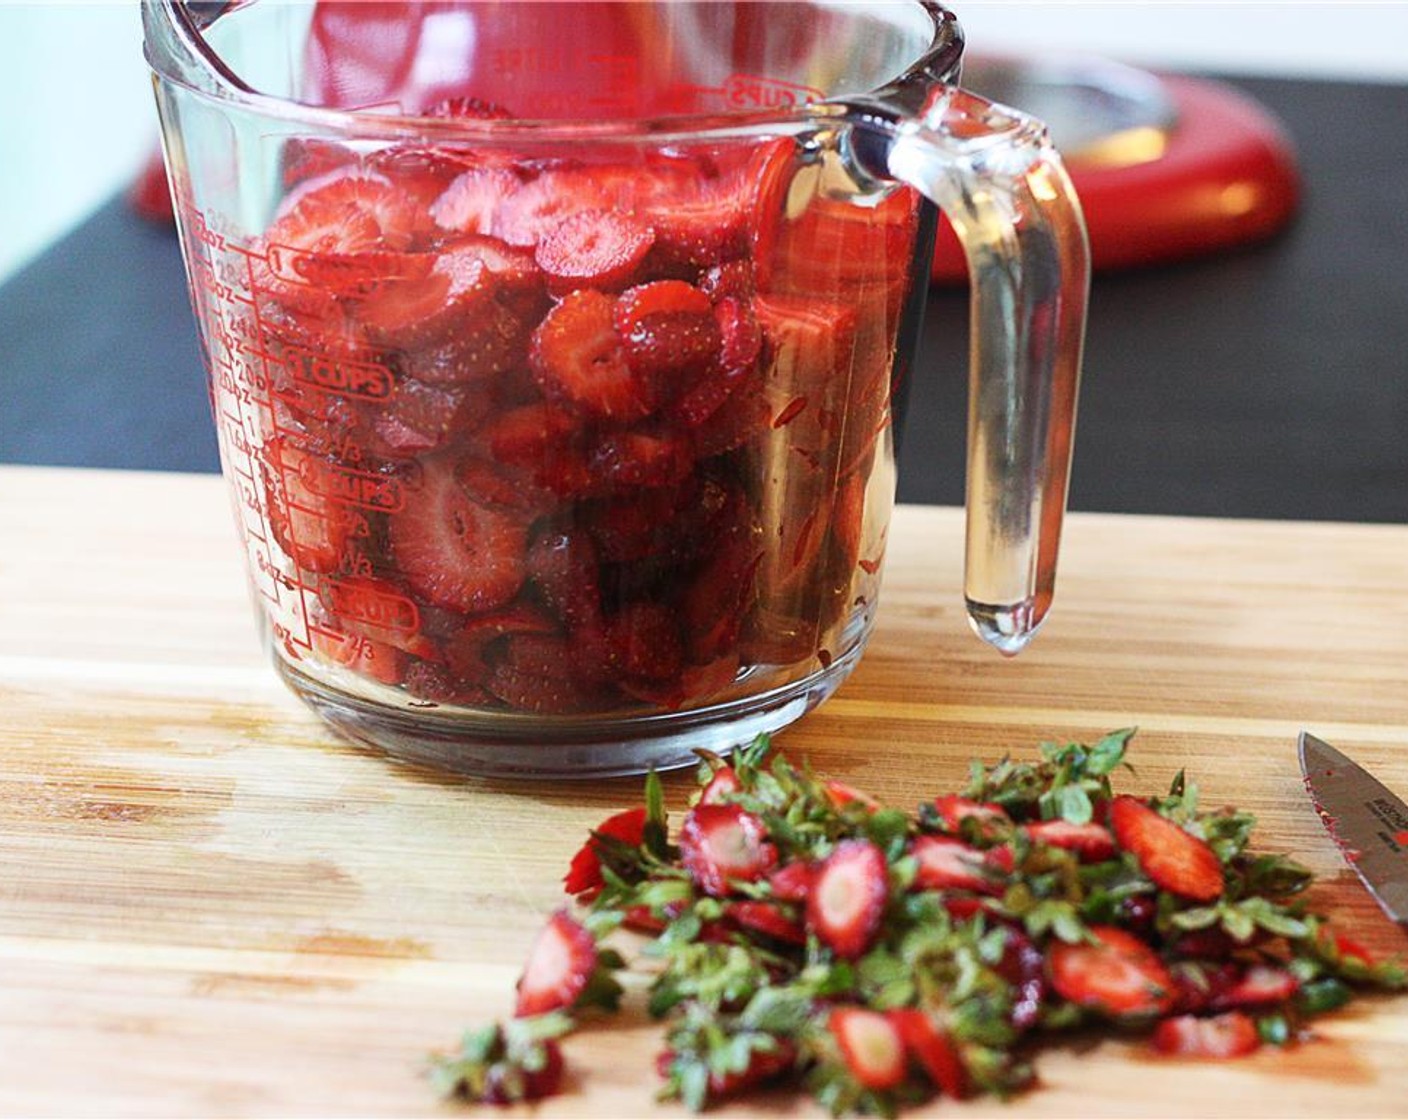 step 8 While the cake cools, wash Fresh Strawberries (3 cups) and allow to dry slightly in a colander. Trim off the greens and slice the strawberries into a bowl and set aside.